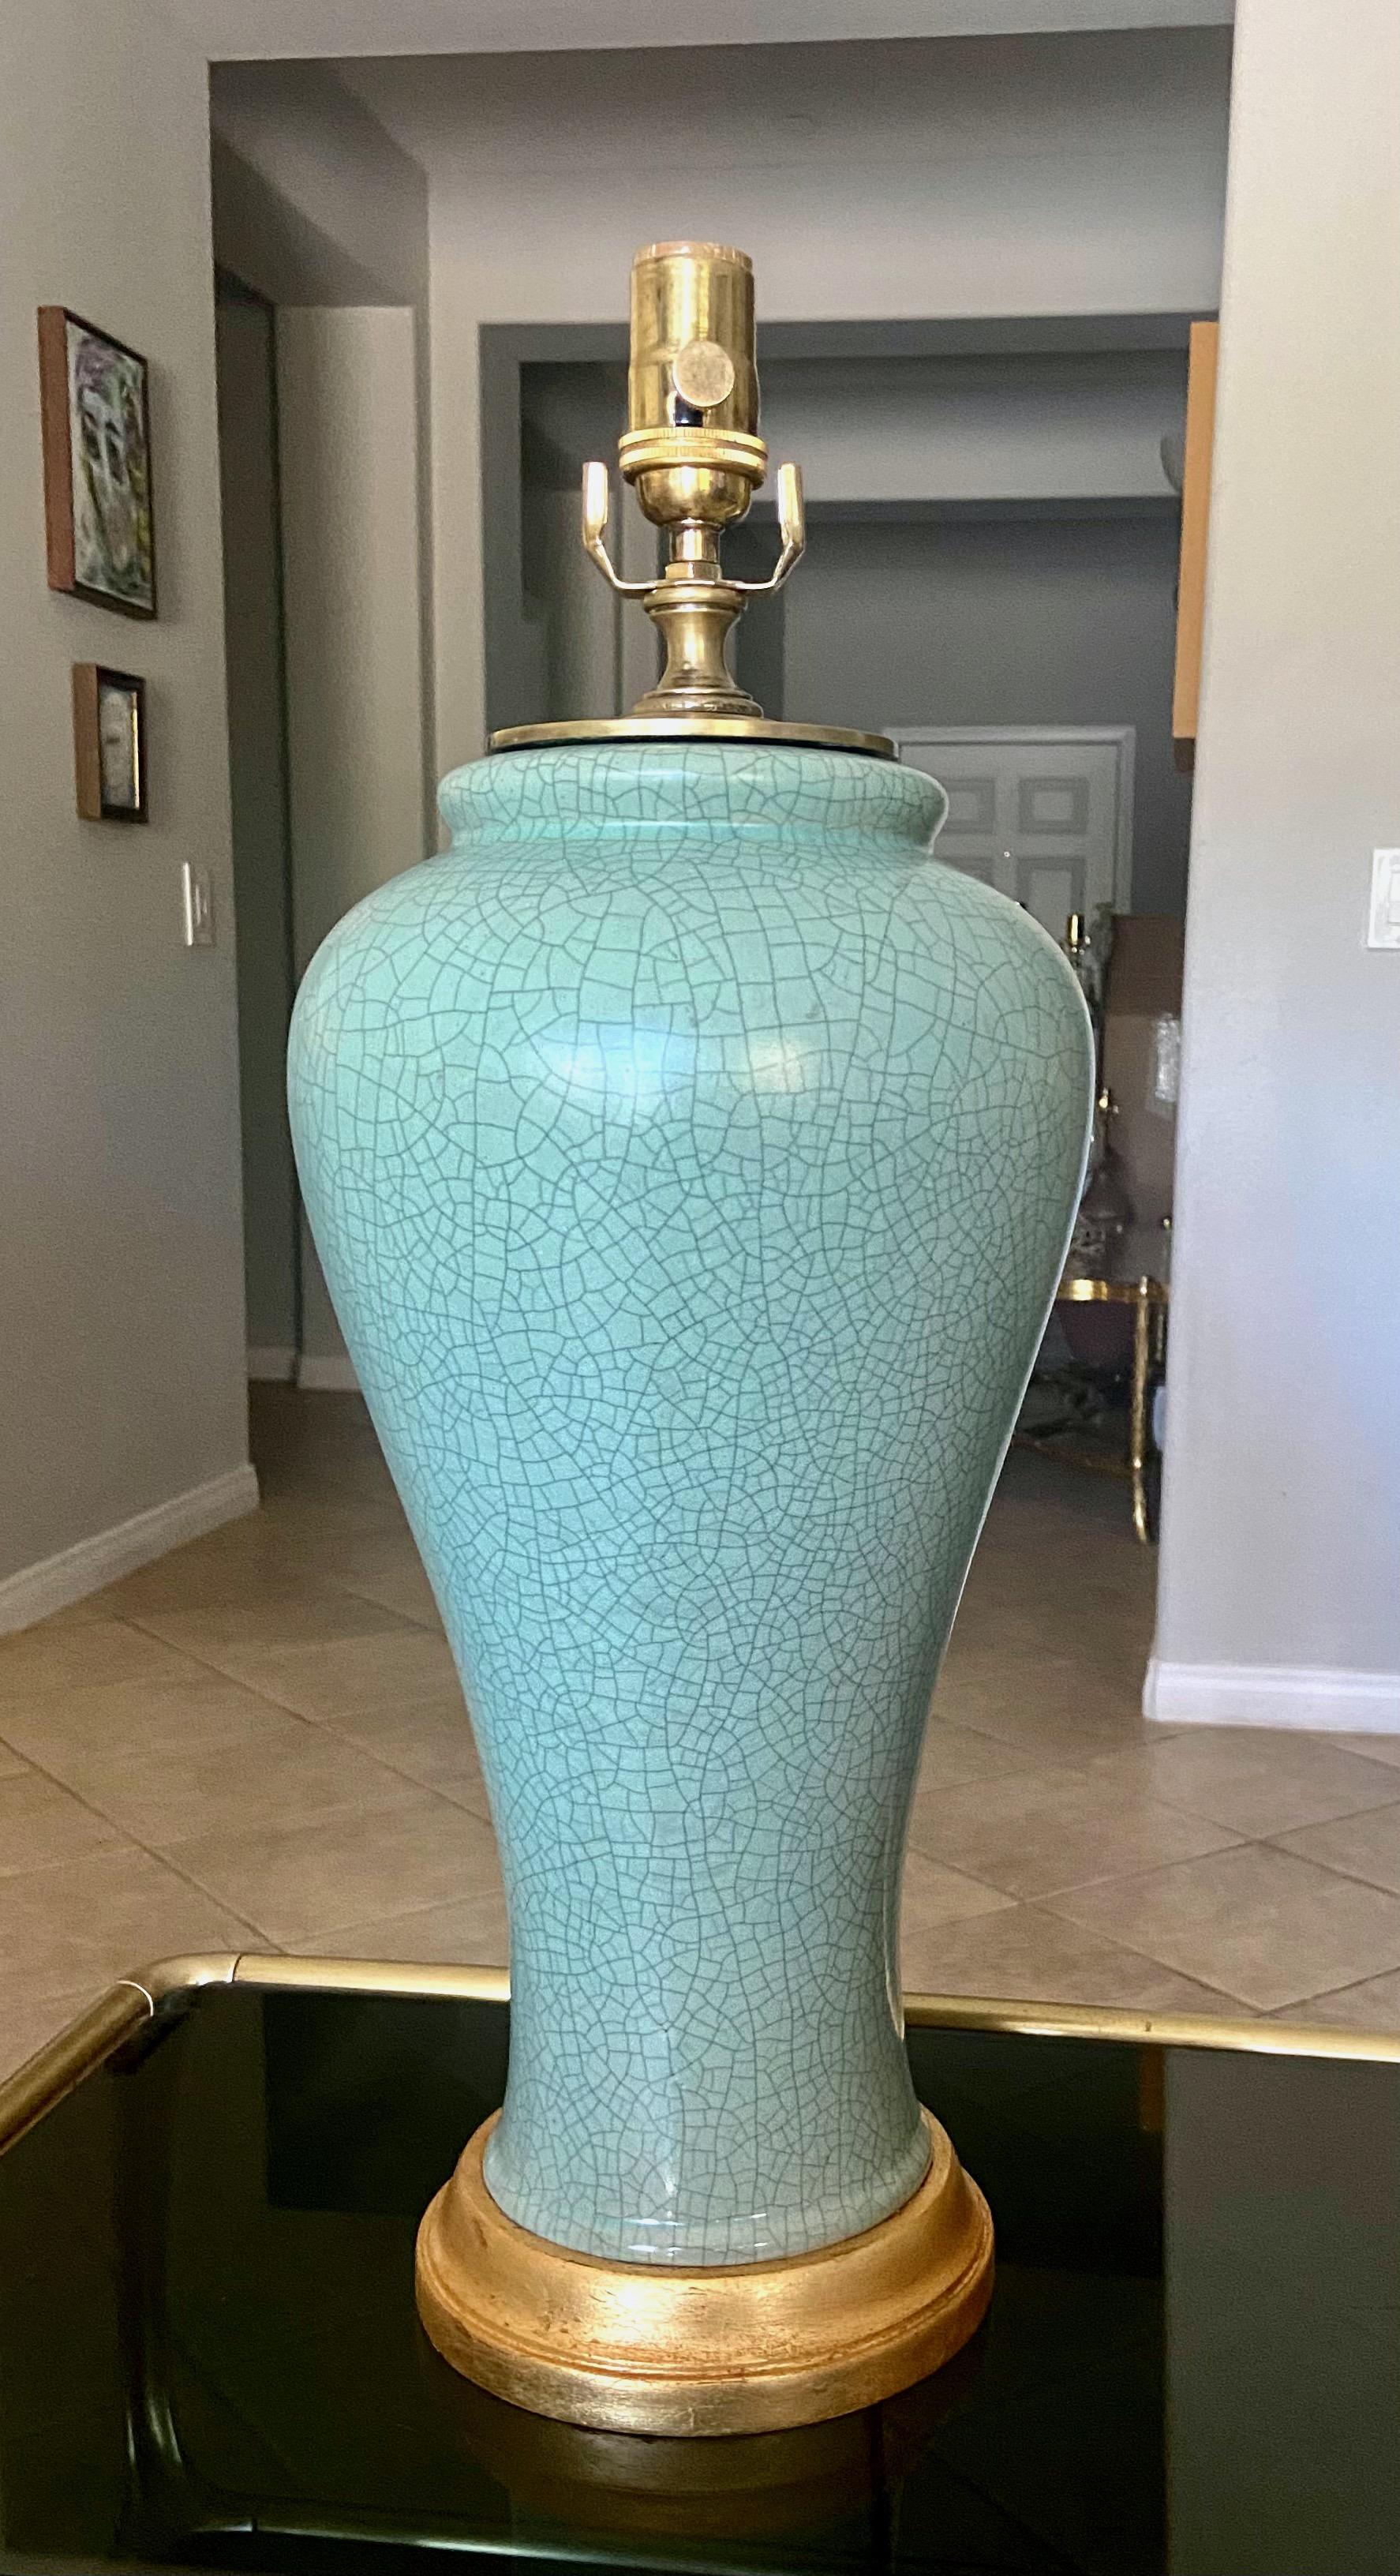 Single Chinese celadon green crackle porcelain baluster form vase table lamp. Mounted on gilt turned wood lamp base. Newly wired with new 3 way socket and fittings. Porcelain vase portion is 16